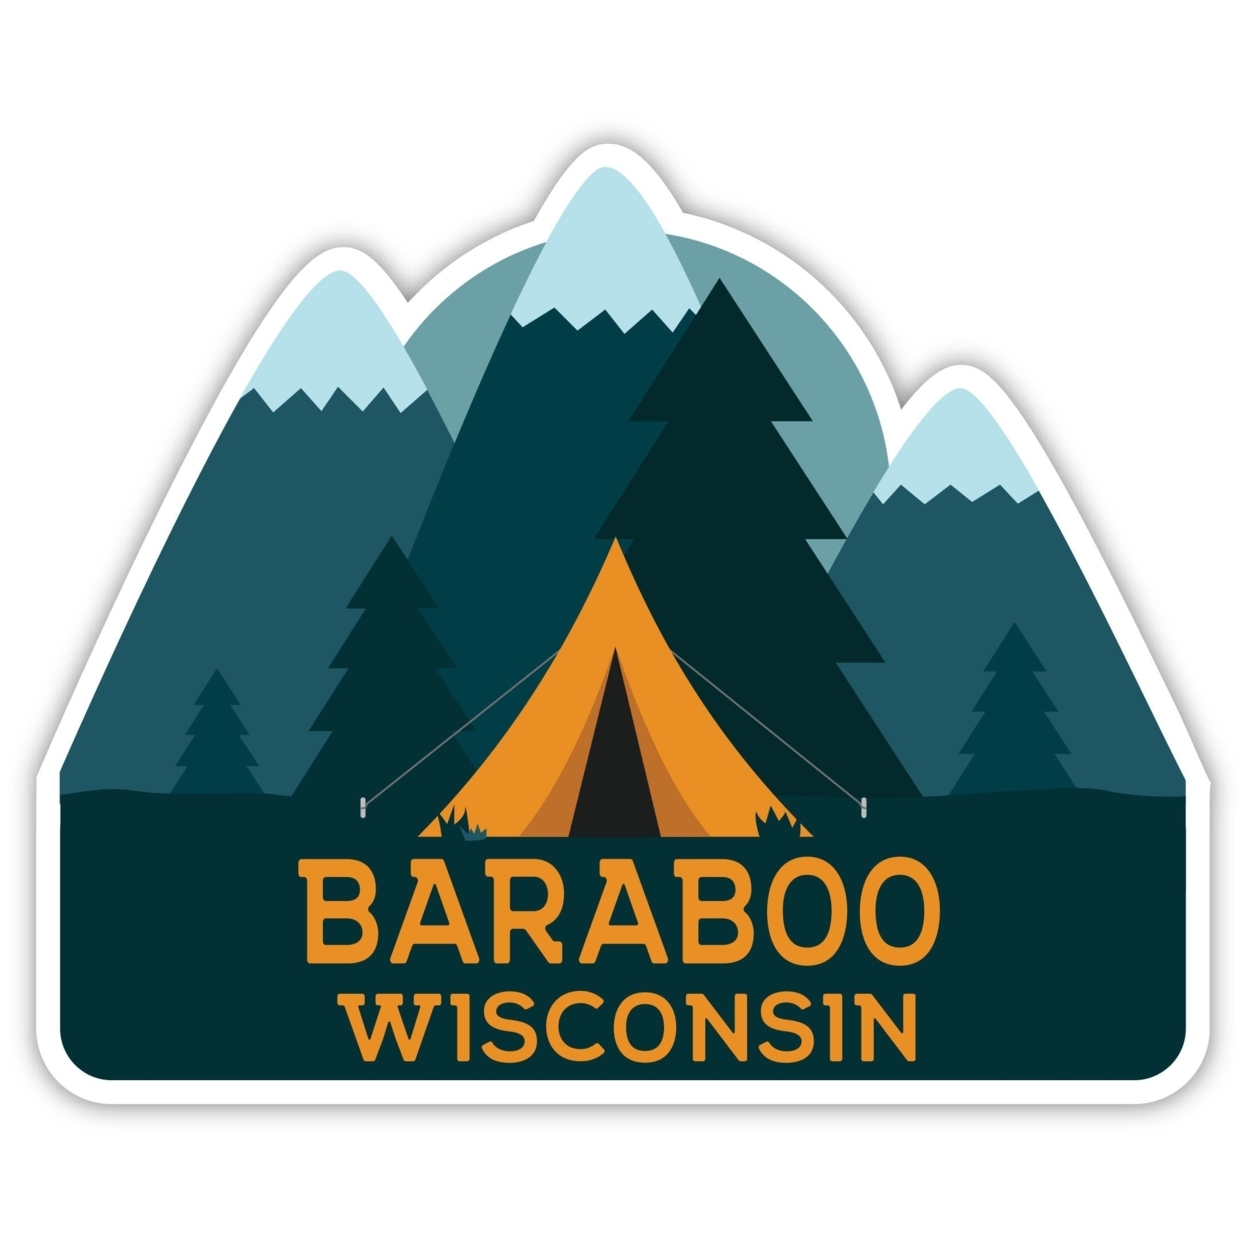 Baraboo Wisconsin Souvenir Decorative Stickers (Choose Theme And Size) - Single Unit, 4-Inch, Tent